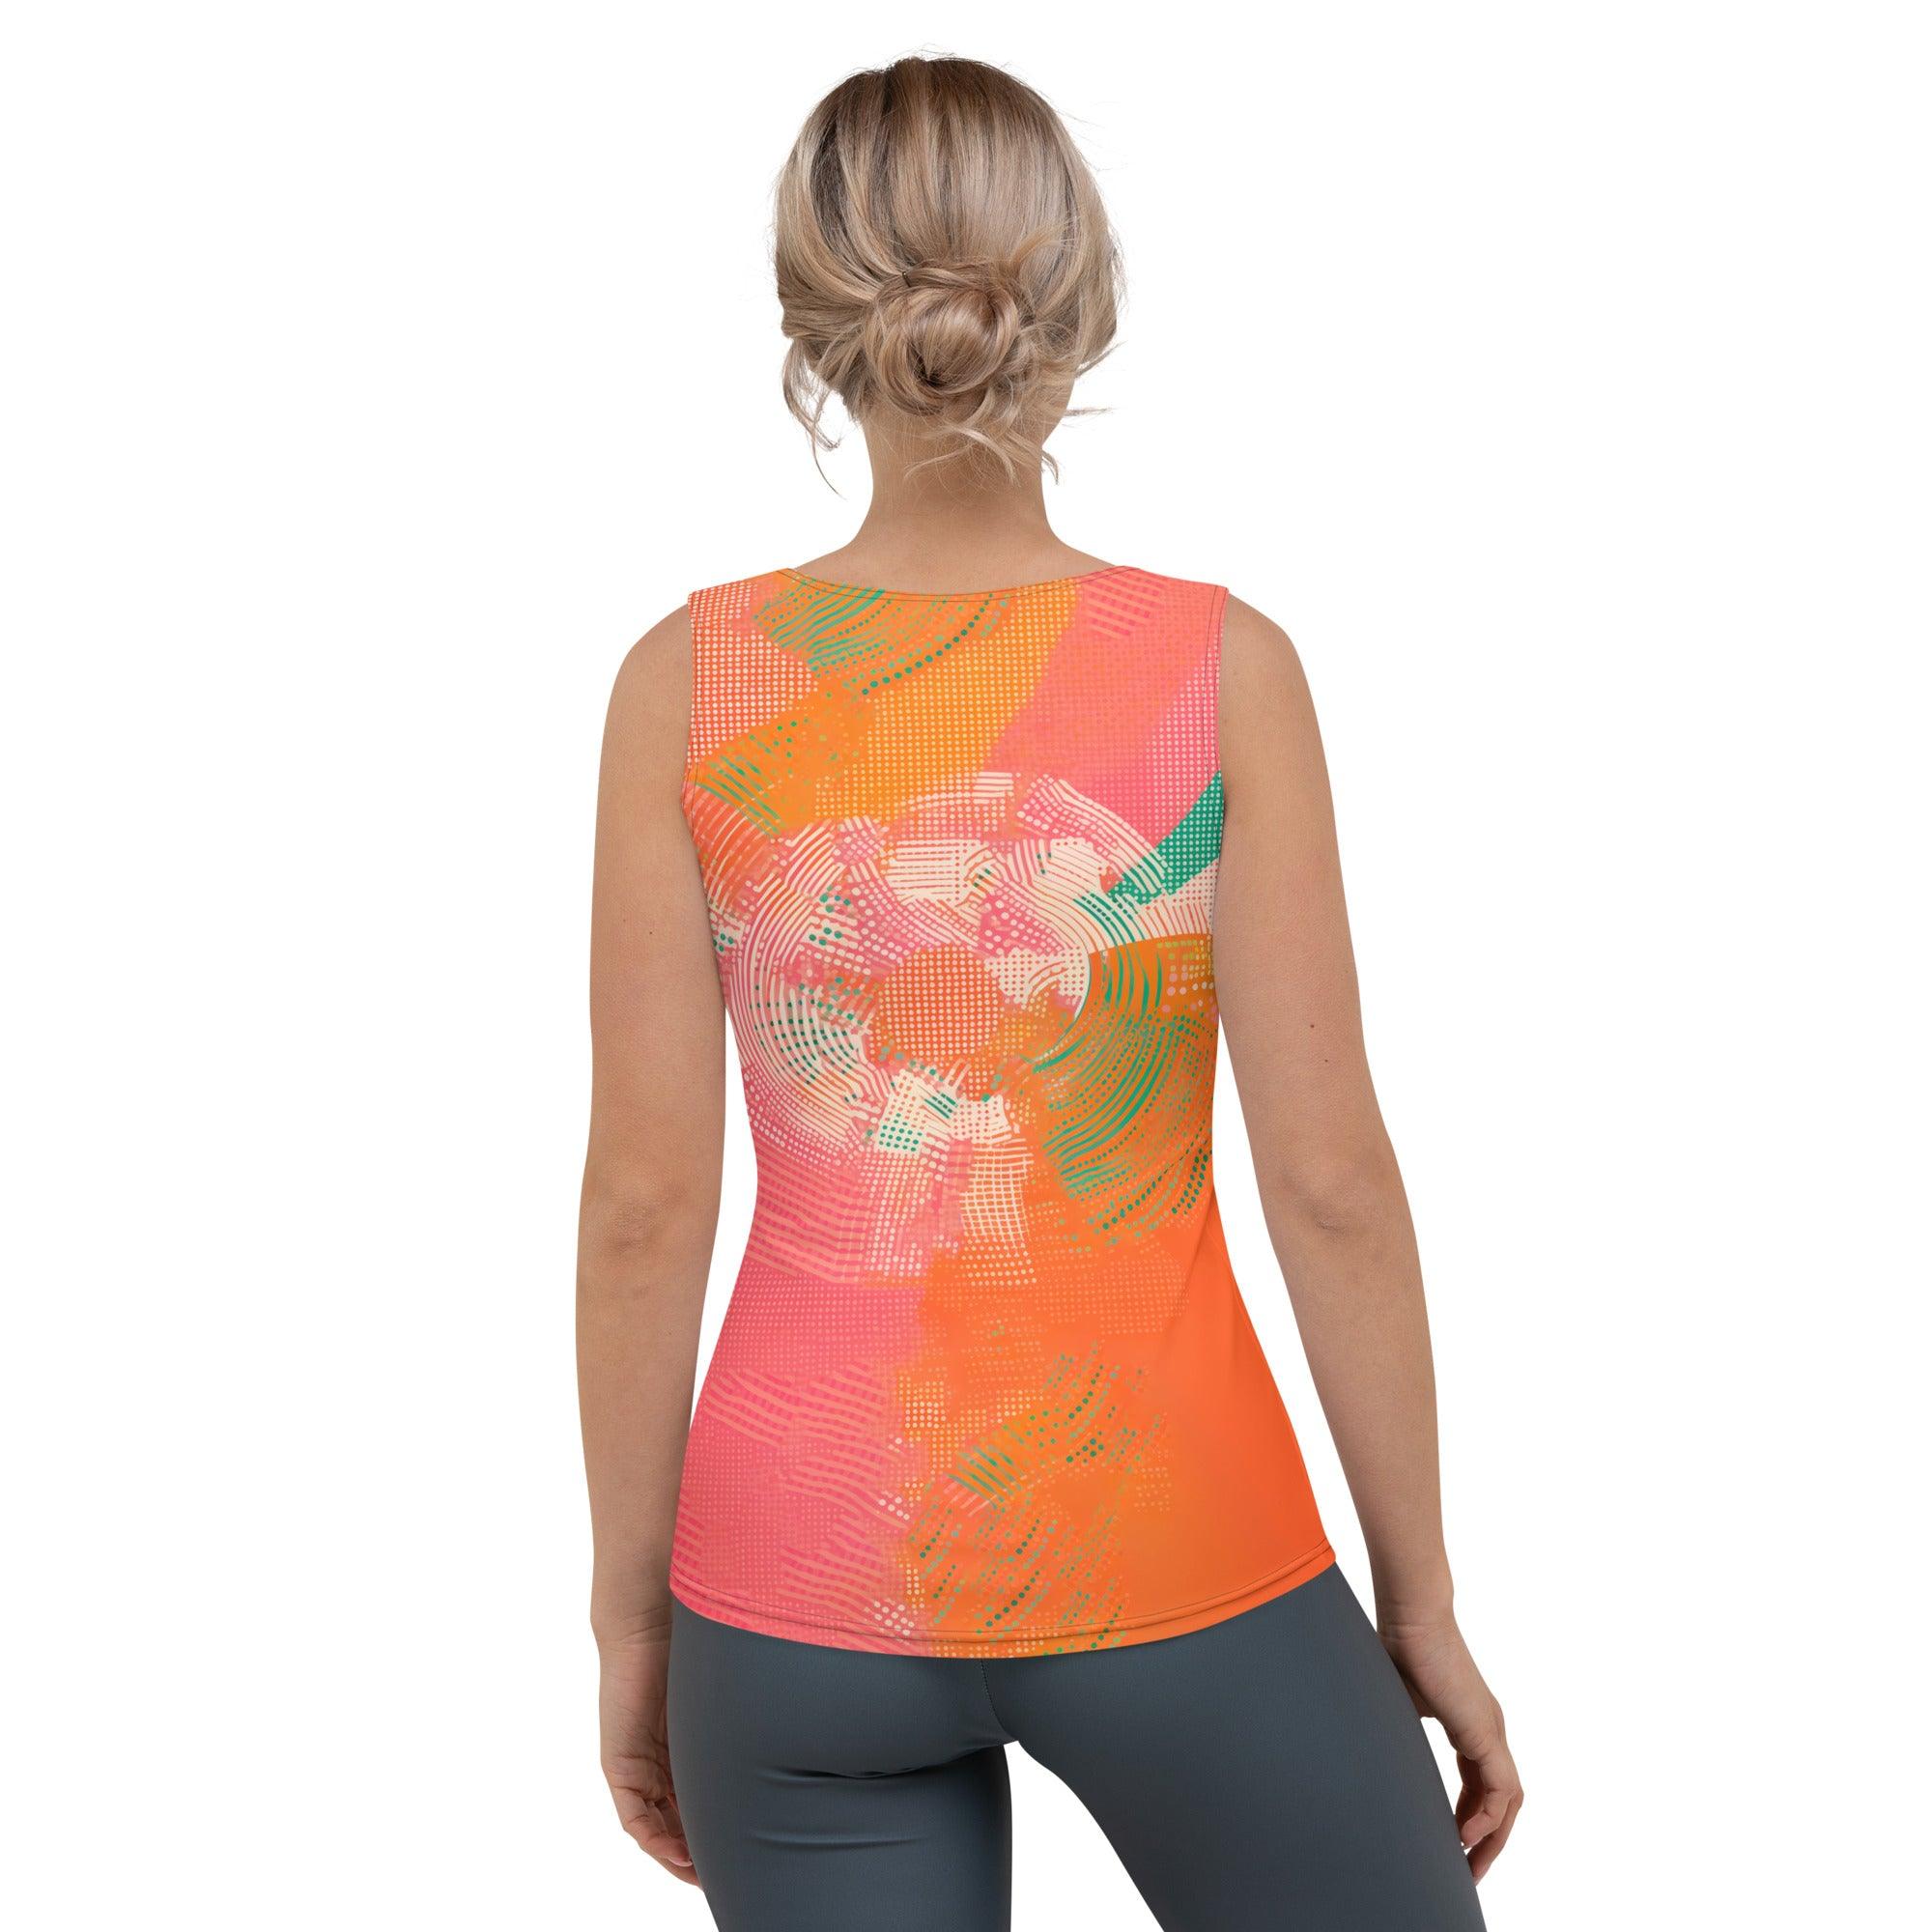 Close-up of the high-quality fabric of Balletic Extravaganza tank top.